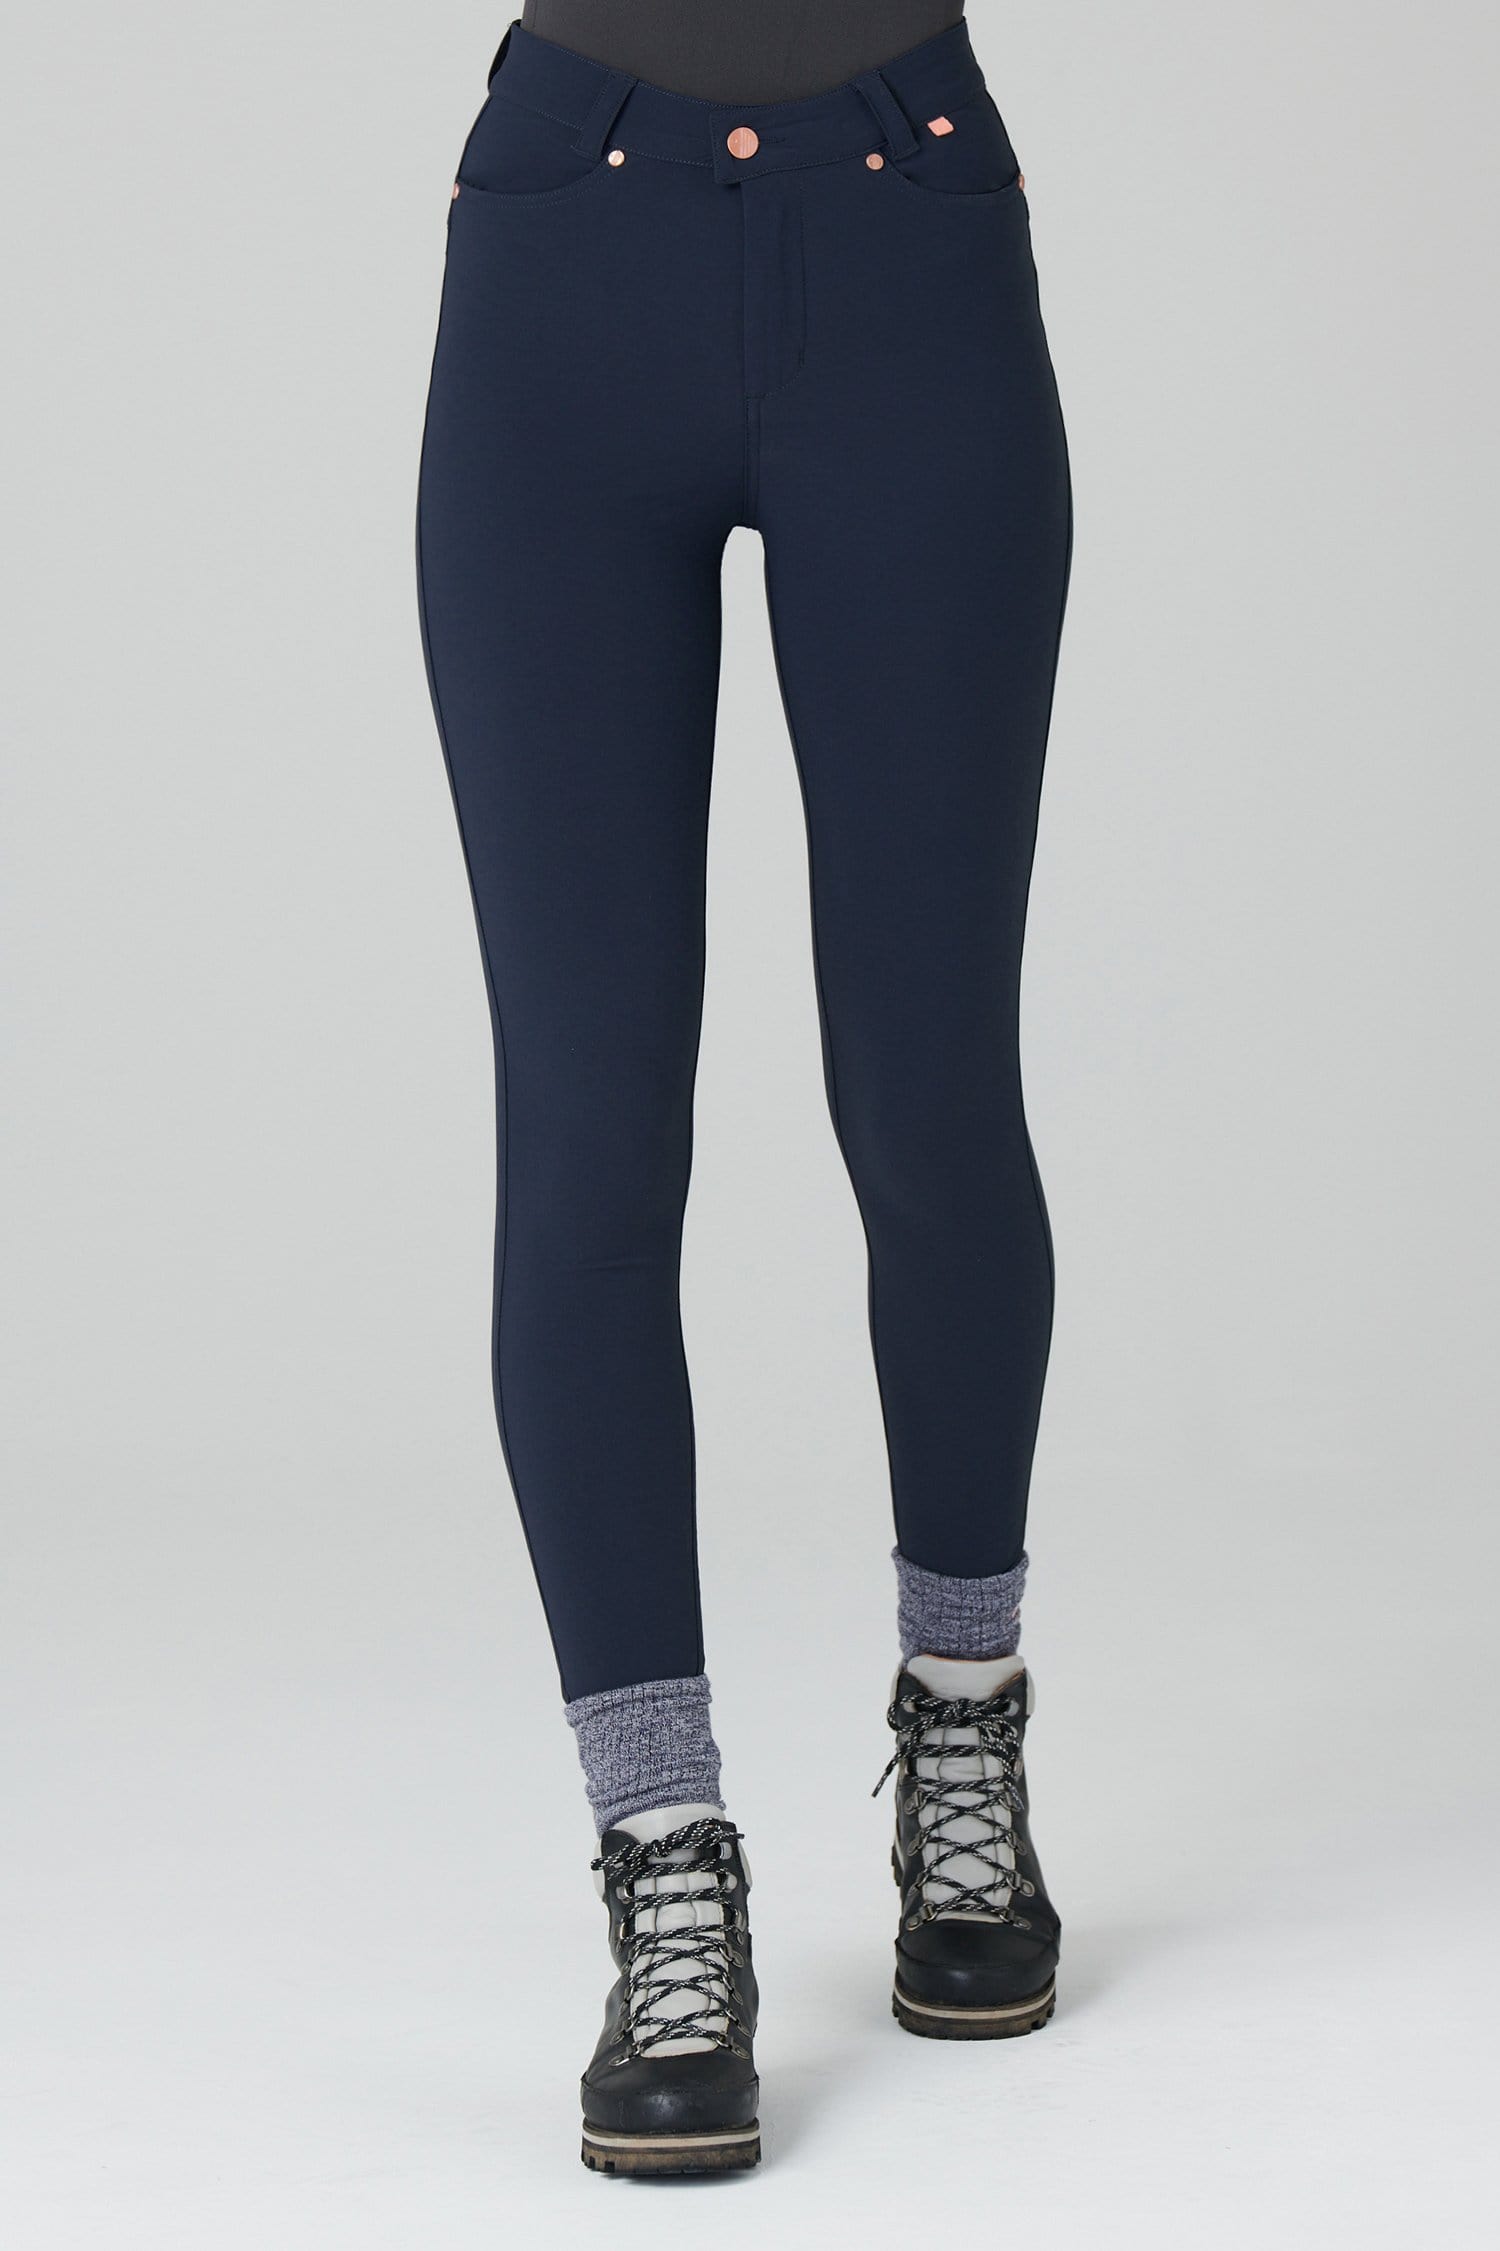 Thermal Skinny Outdoor Trousers - Deep Navy - 36l / Uk18 - Womens - Acai Outdoorwear